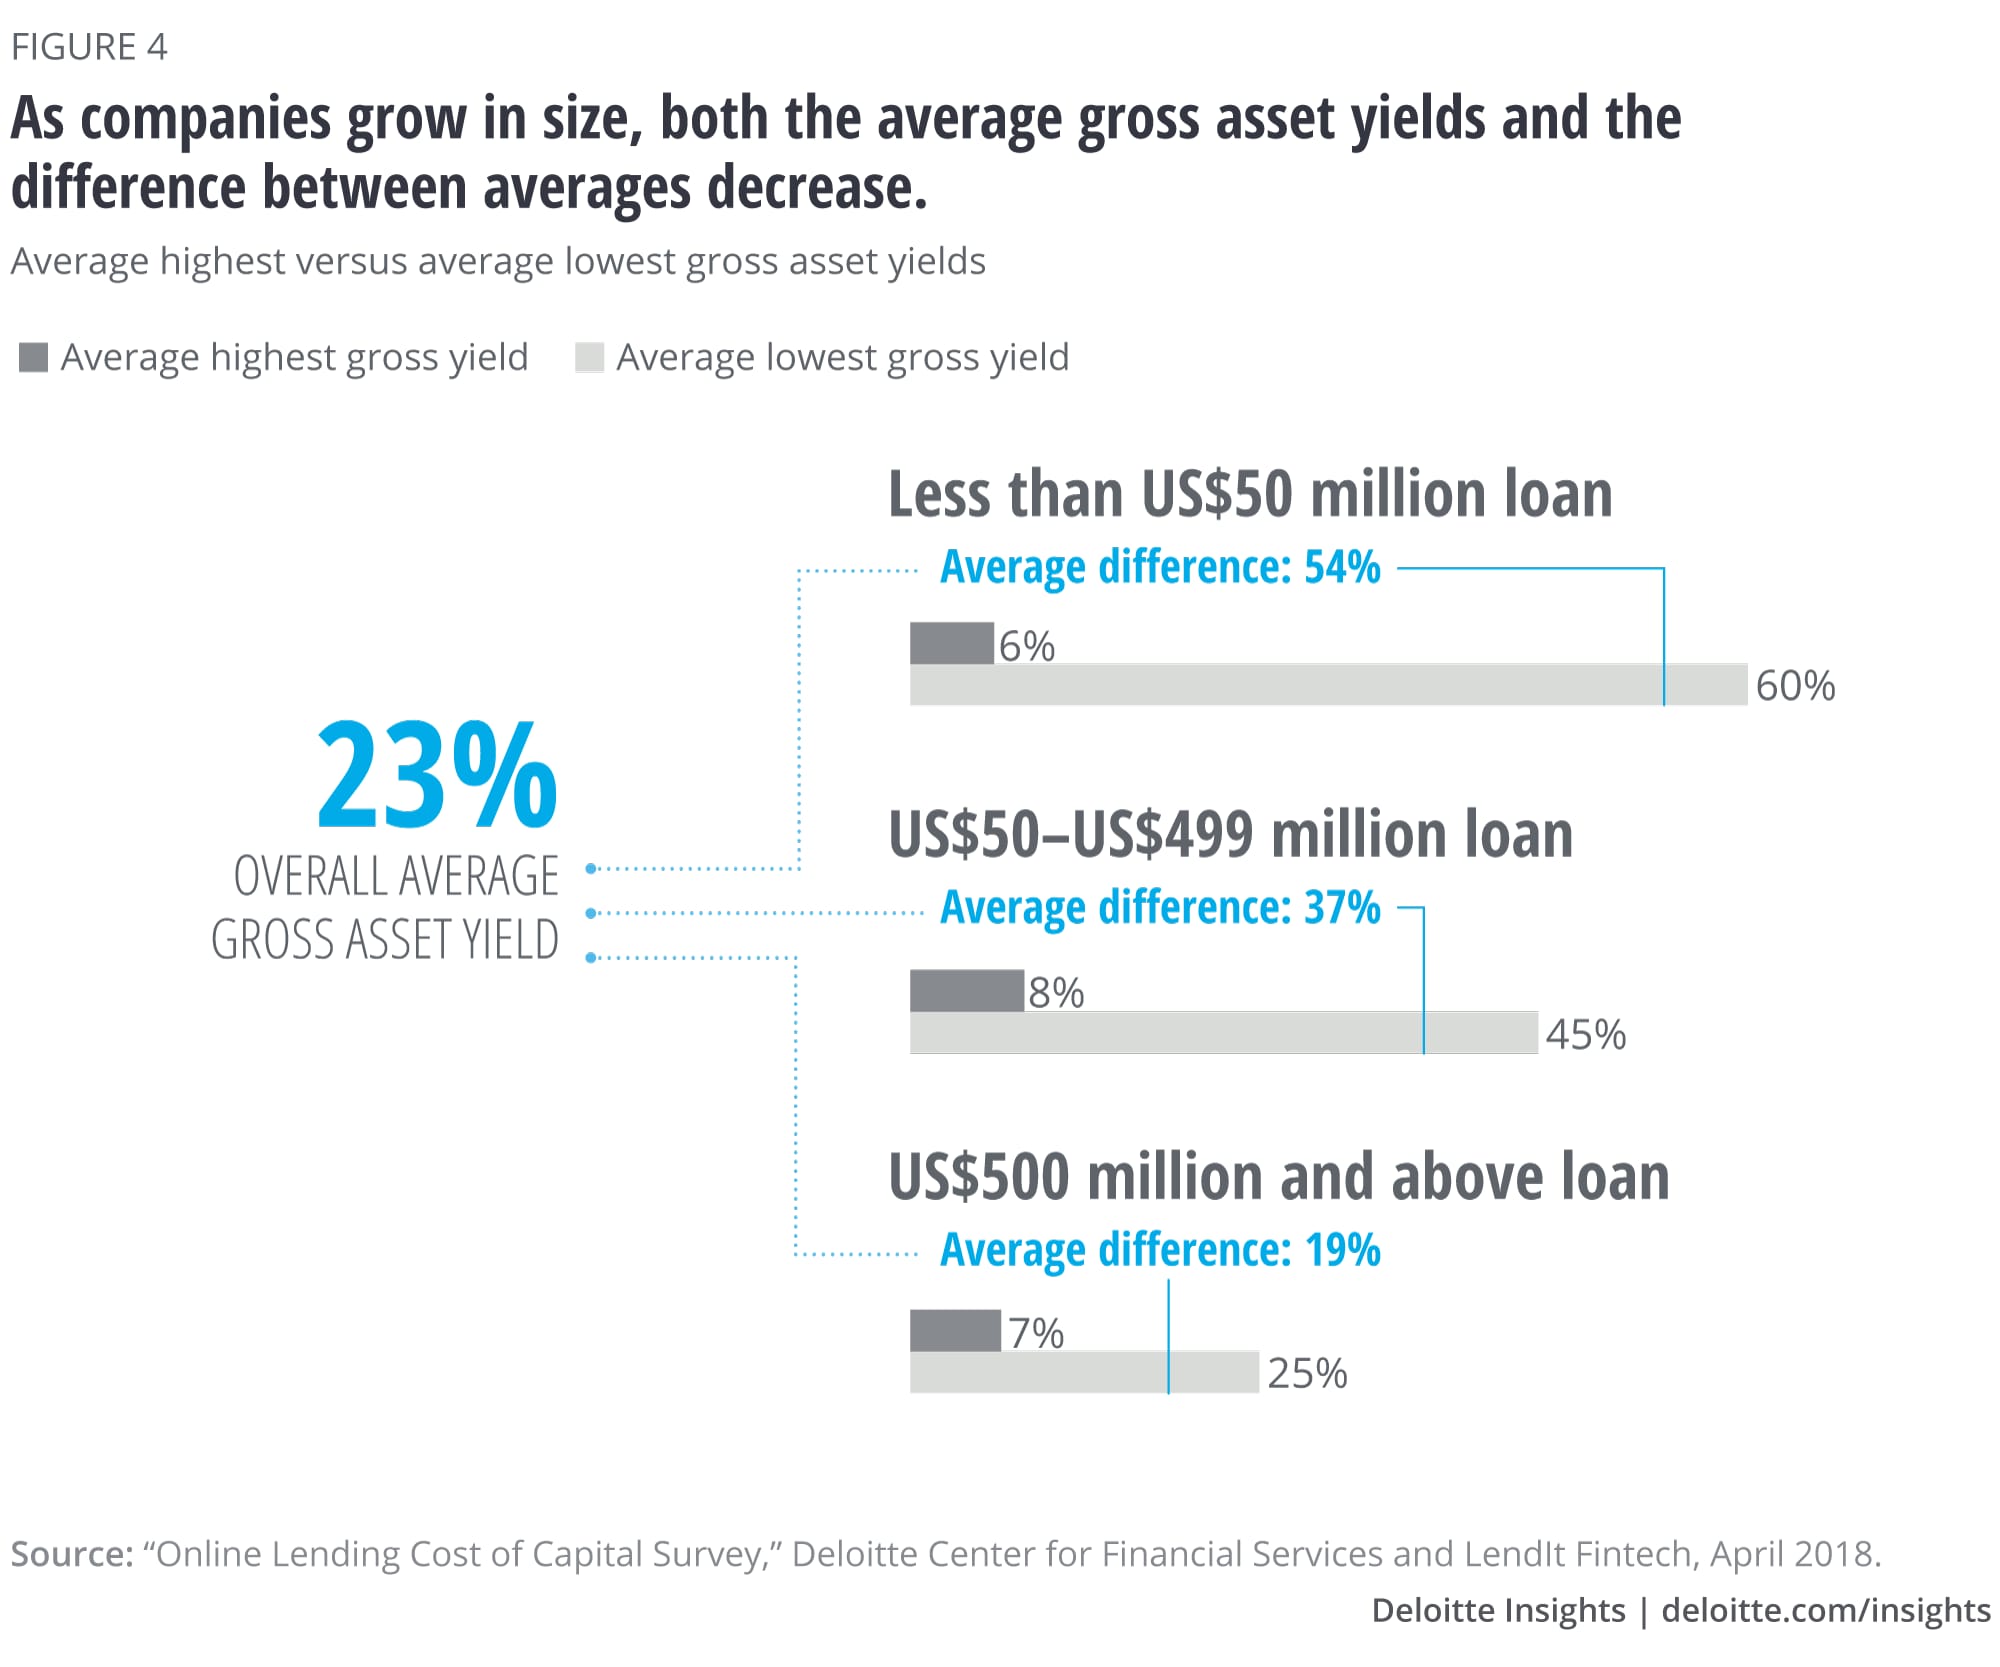 As companies grow in size, both the avaerage gross asset and the difference between averages decrease